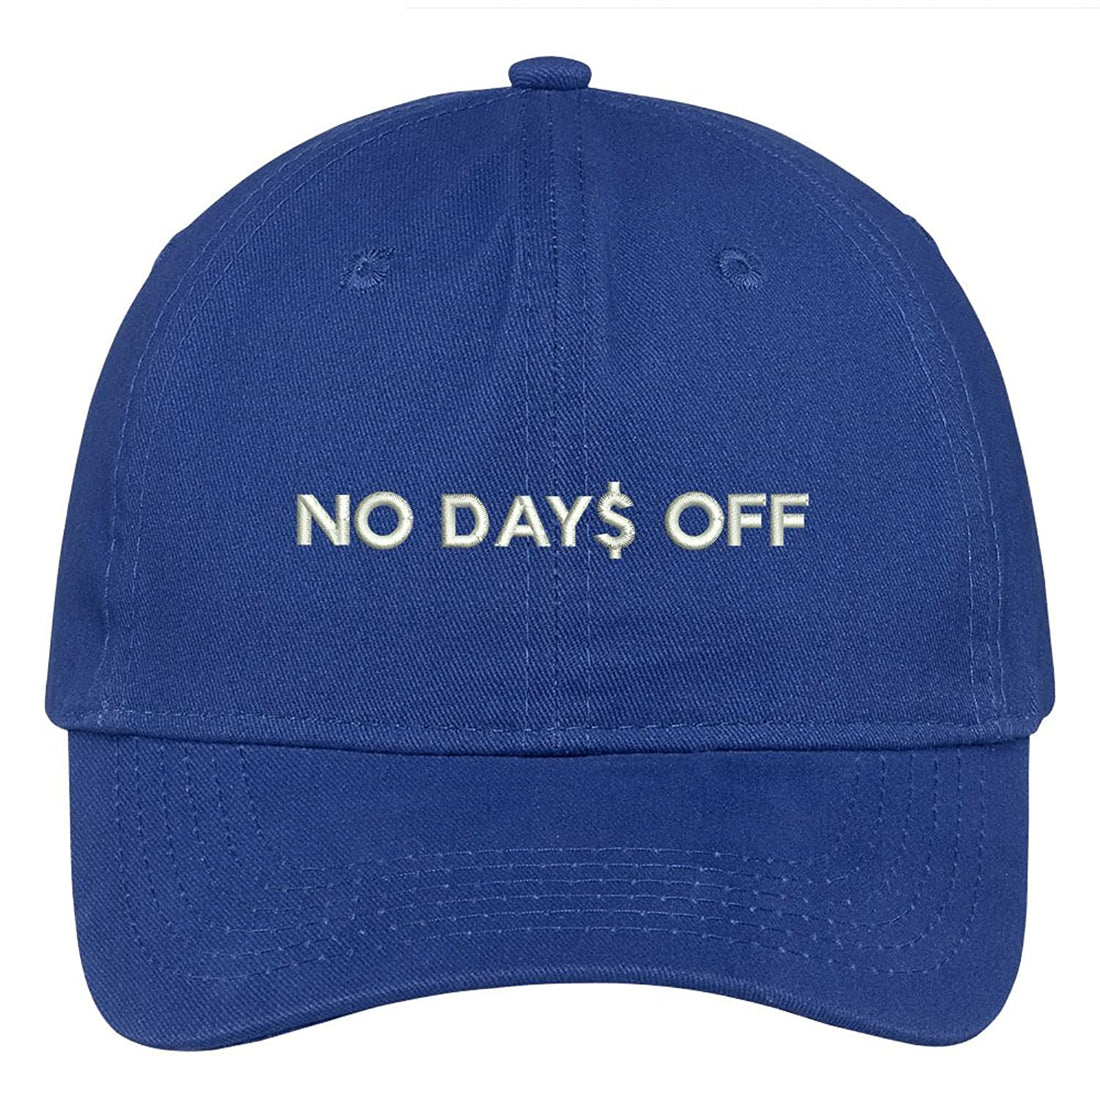 Trendy Apparel Shop No Days Off Embroidered Low Profile Soft Cotton Brushed Cap